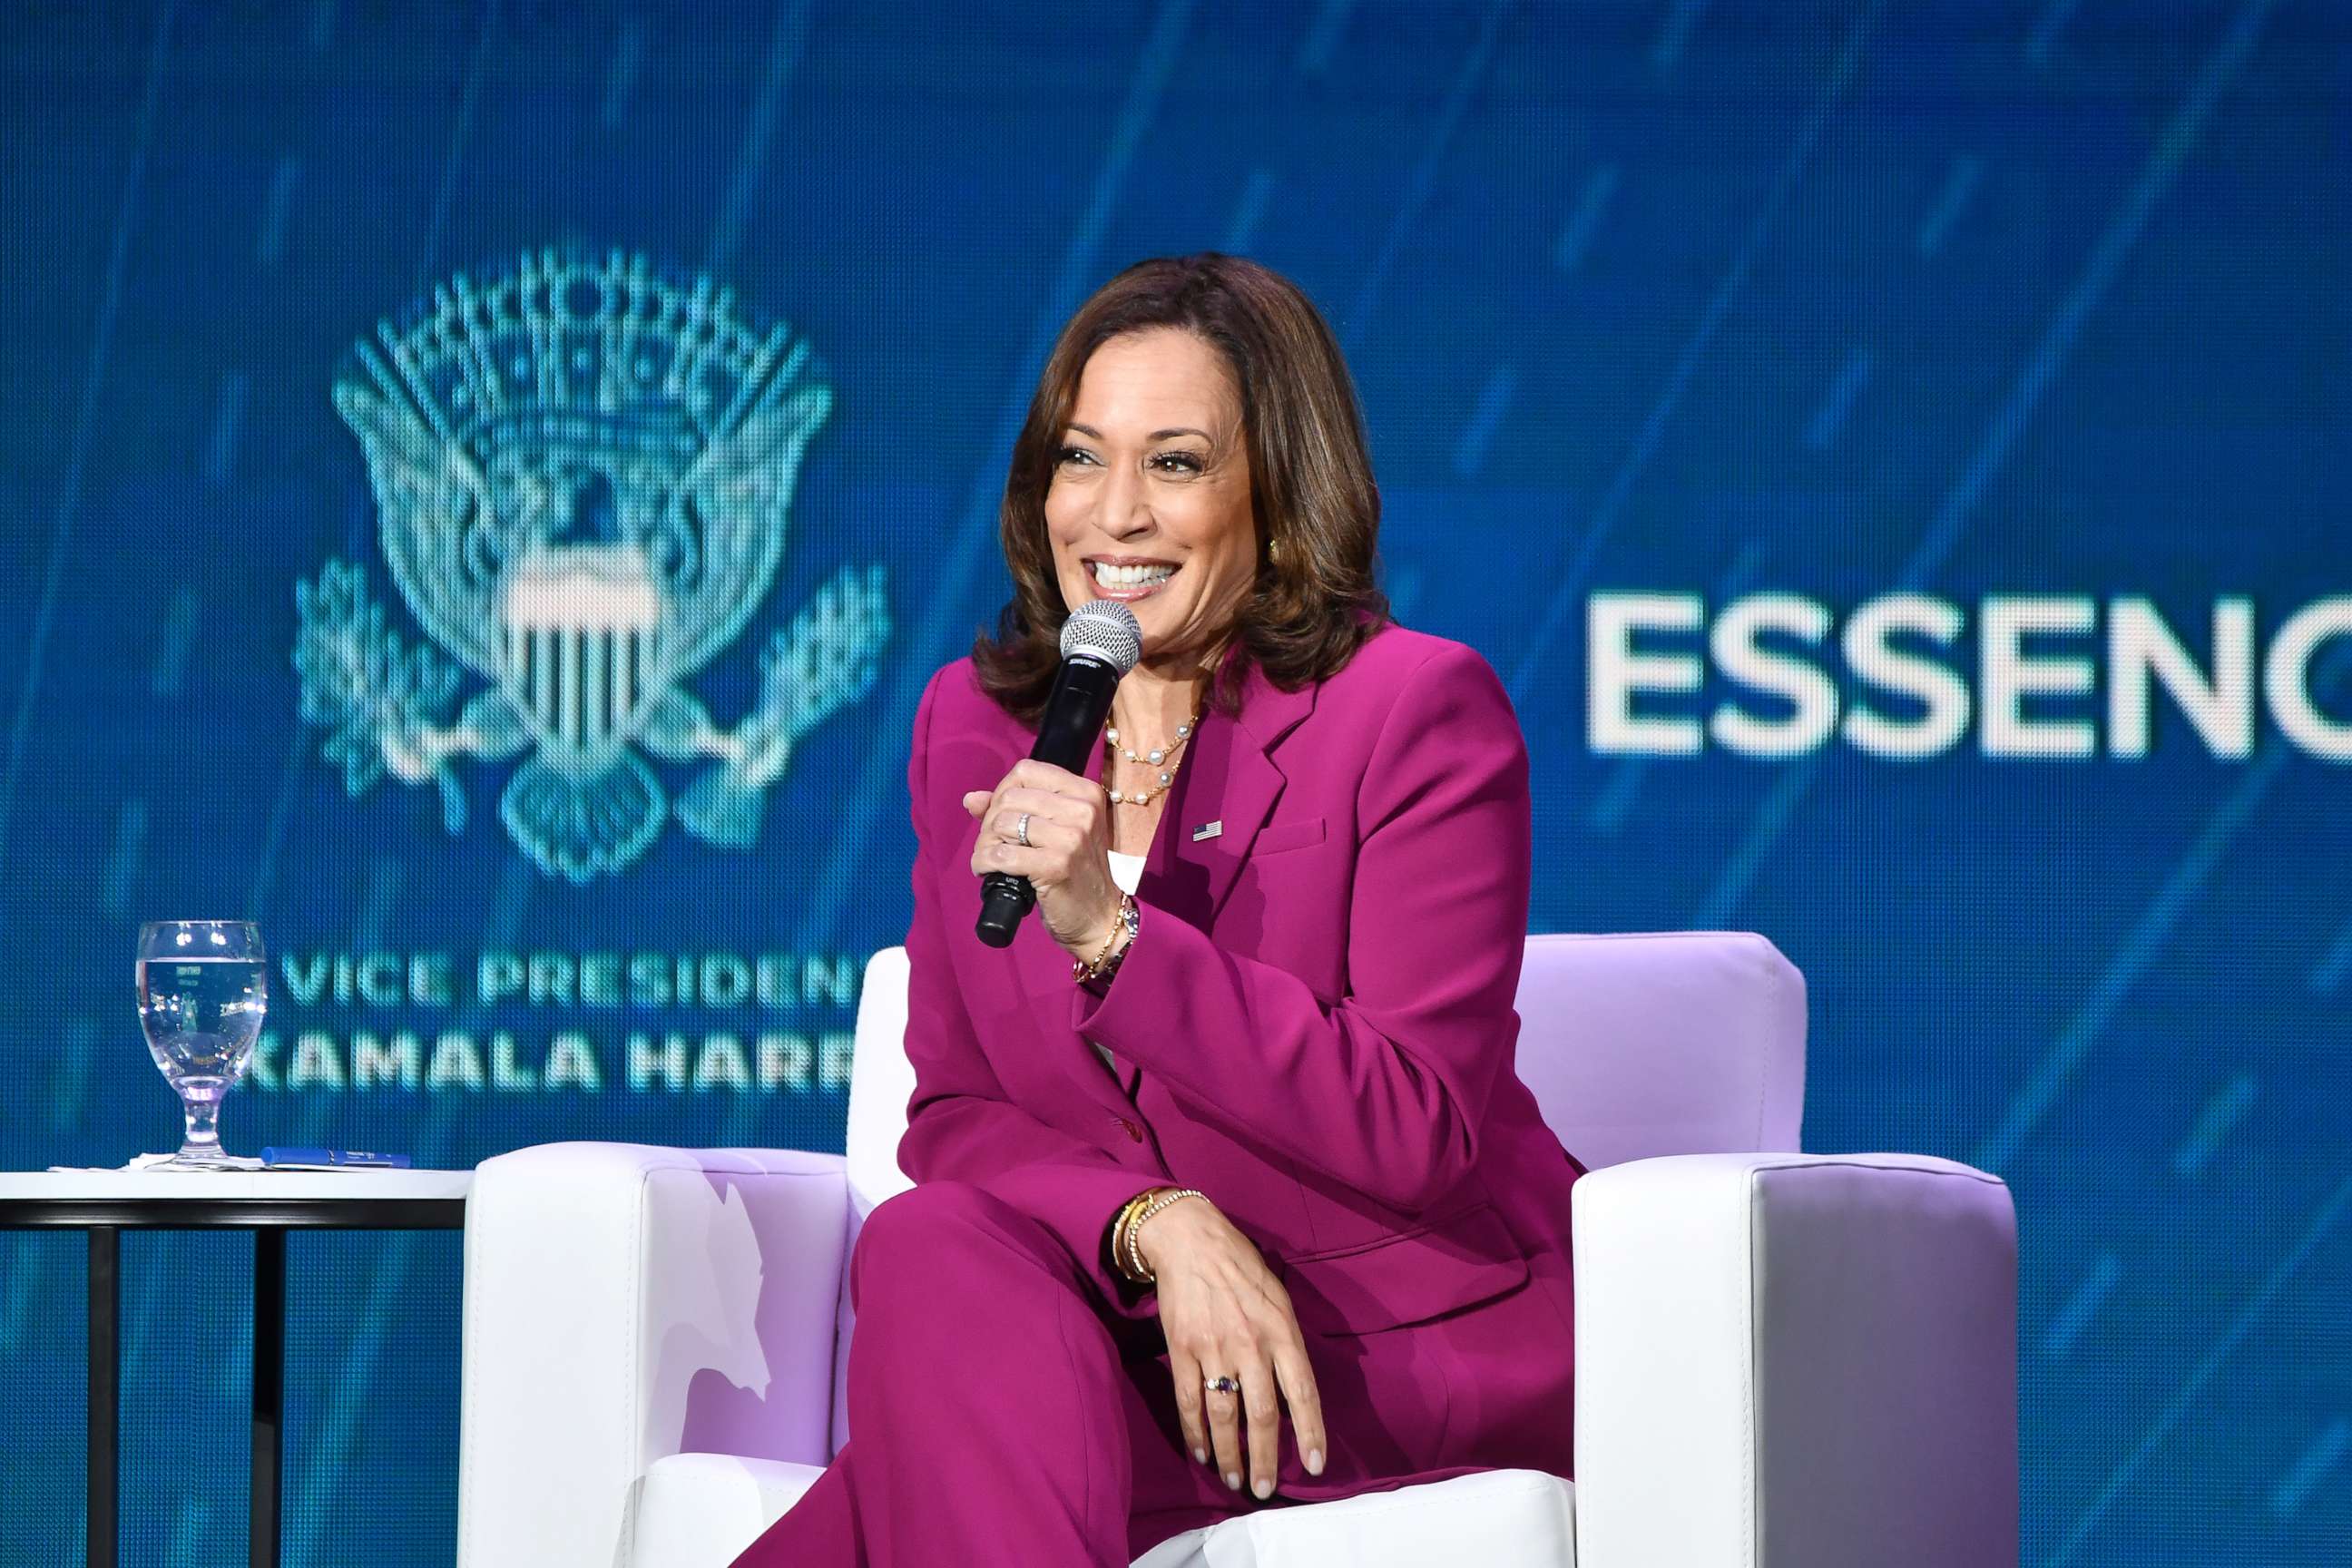 PHOTO: Vice President Kamala Harris speaks onstage during the 2022 Essence Festival of Culture at the Ernest N. Morial Convention Center on July 2, 2022 in New Orleans.